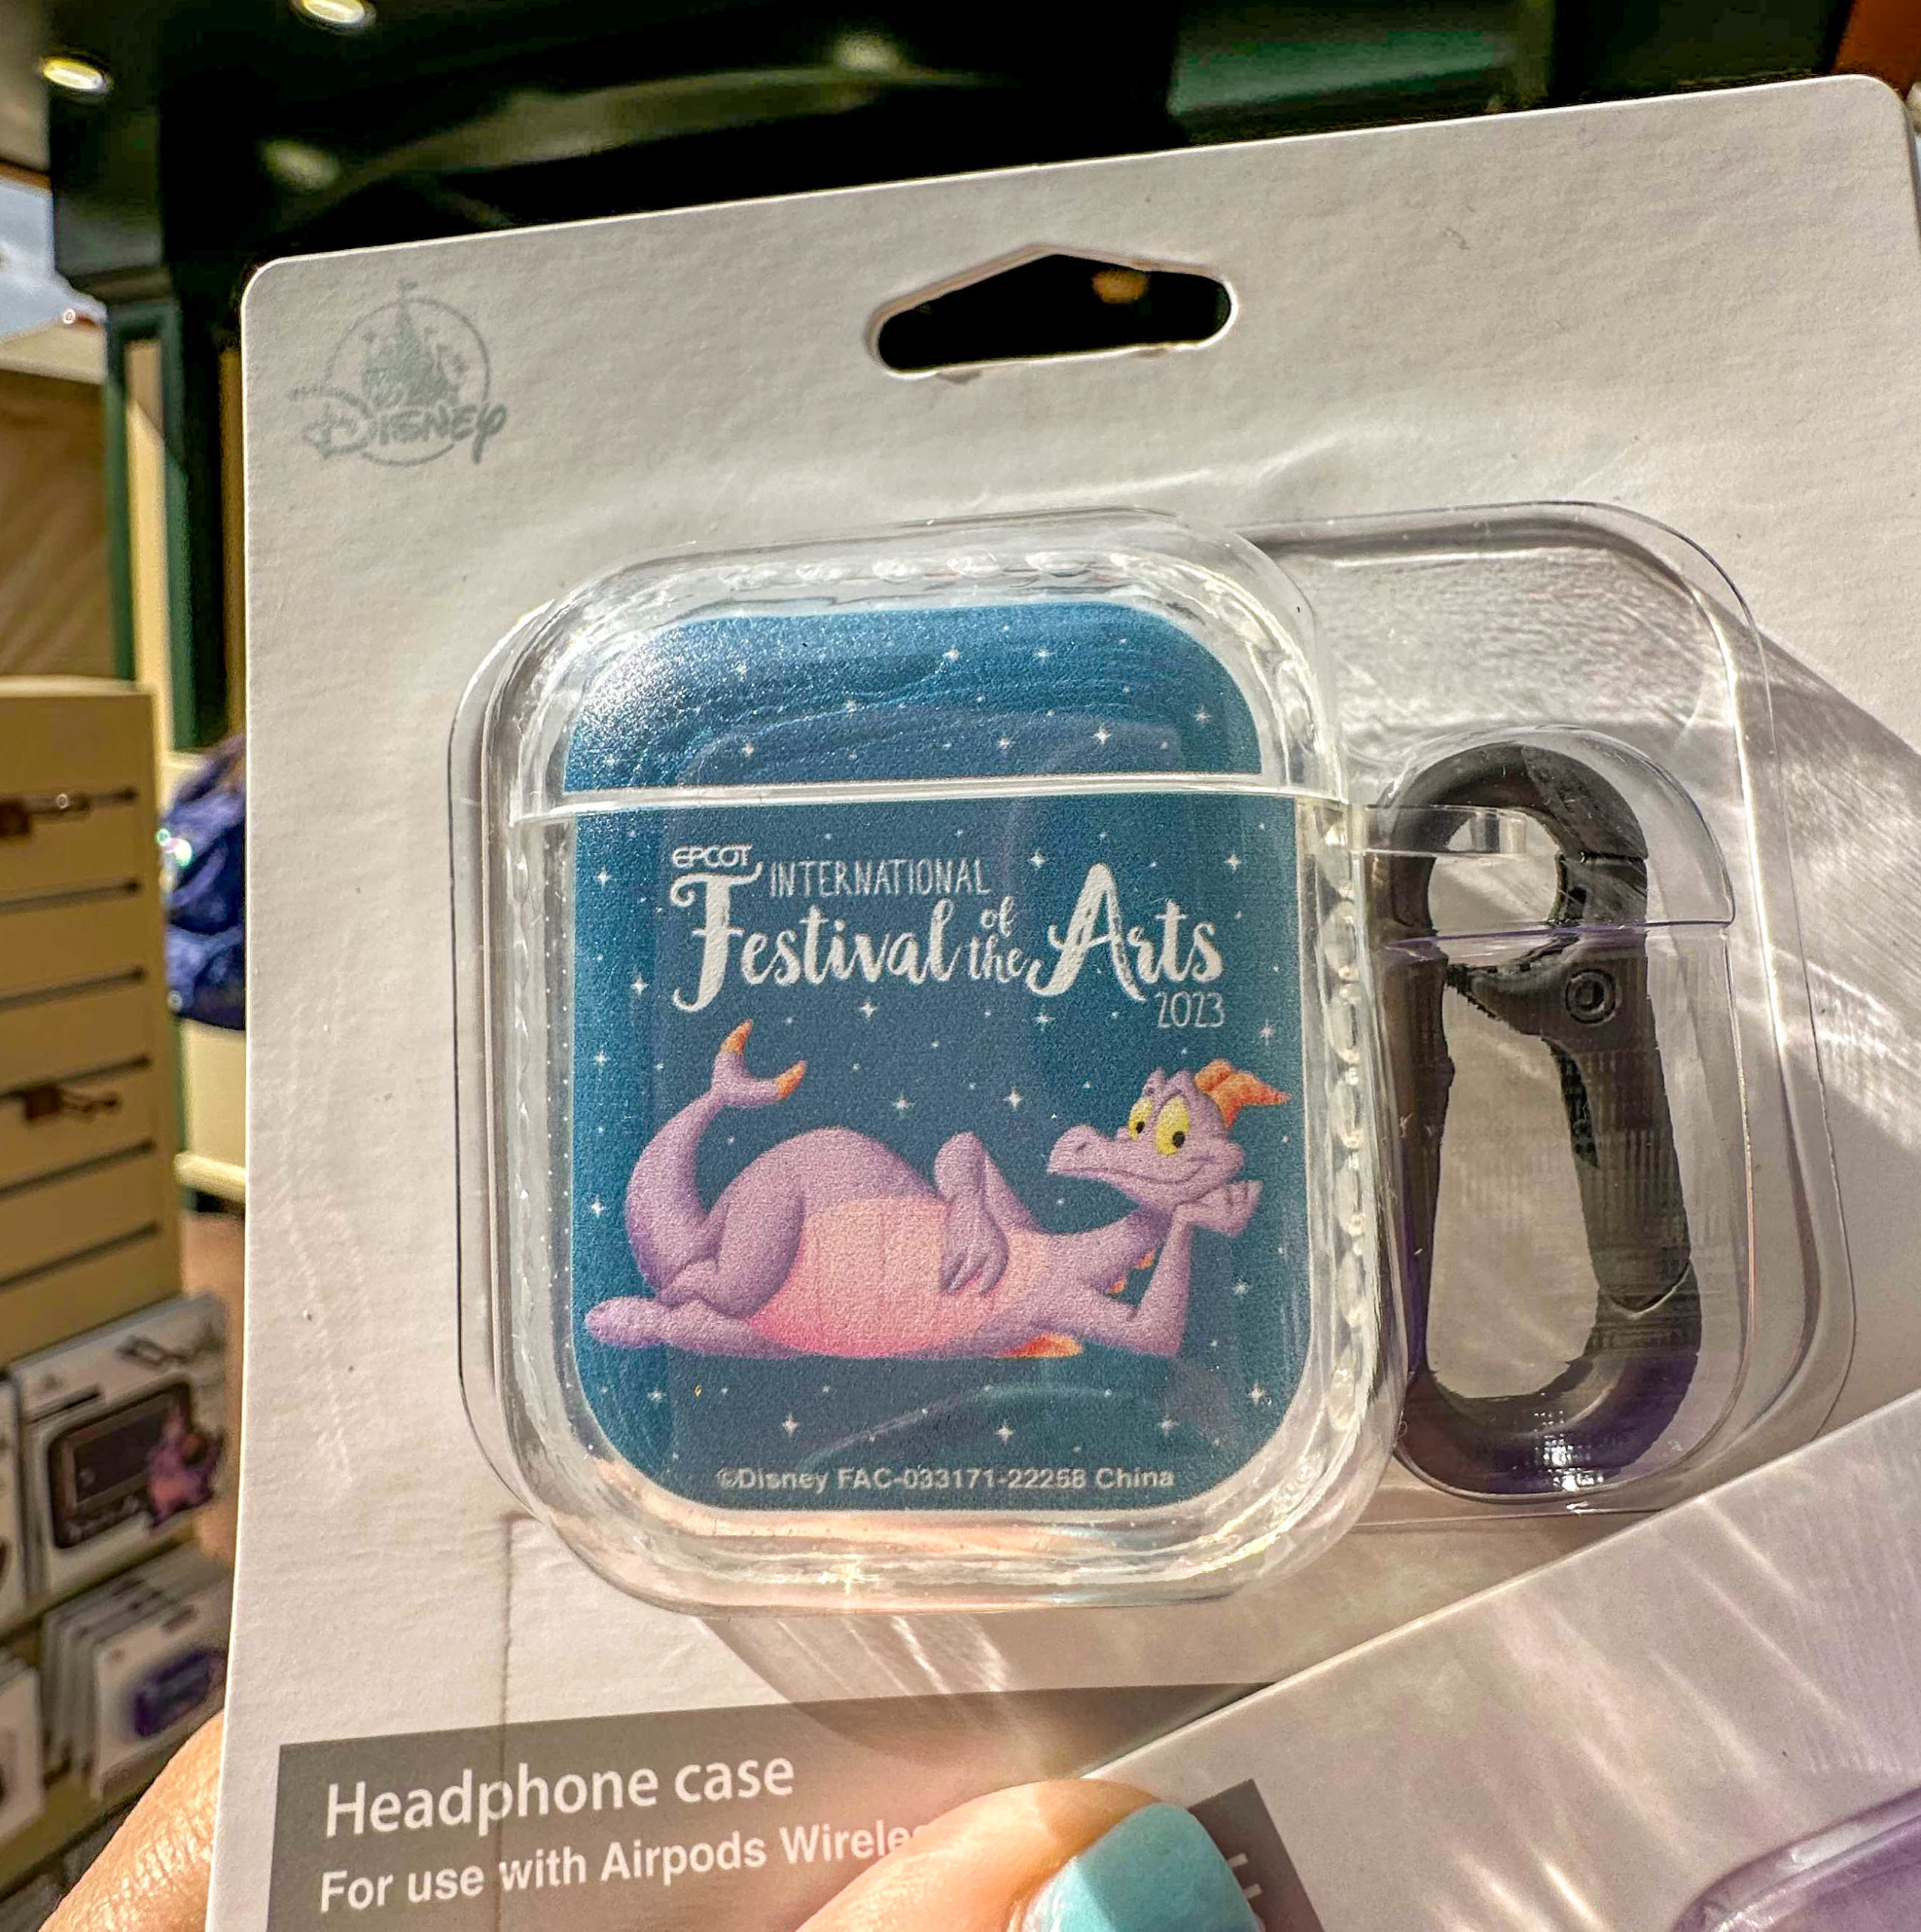 Festival of the Arts Airpods Case